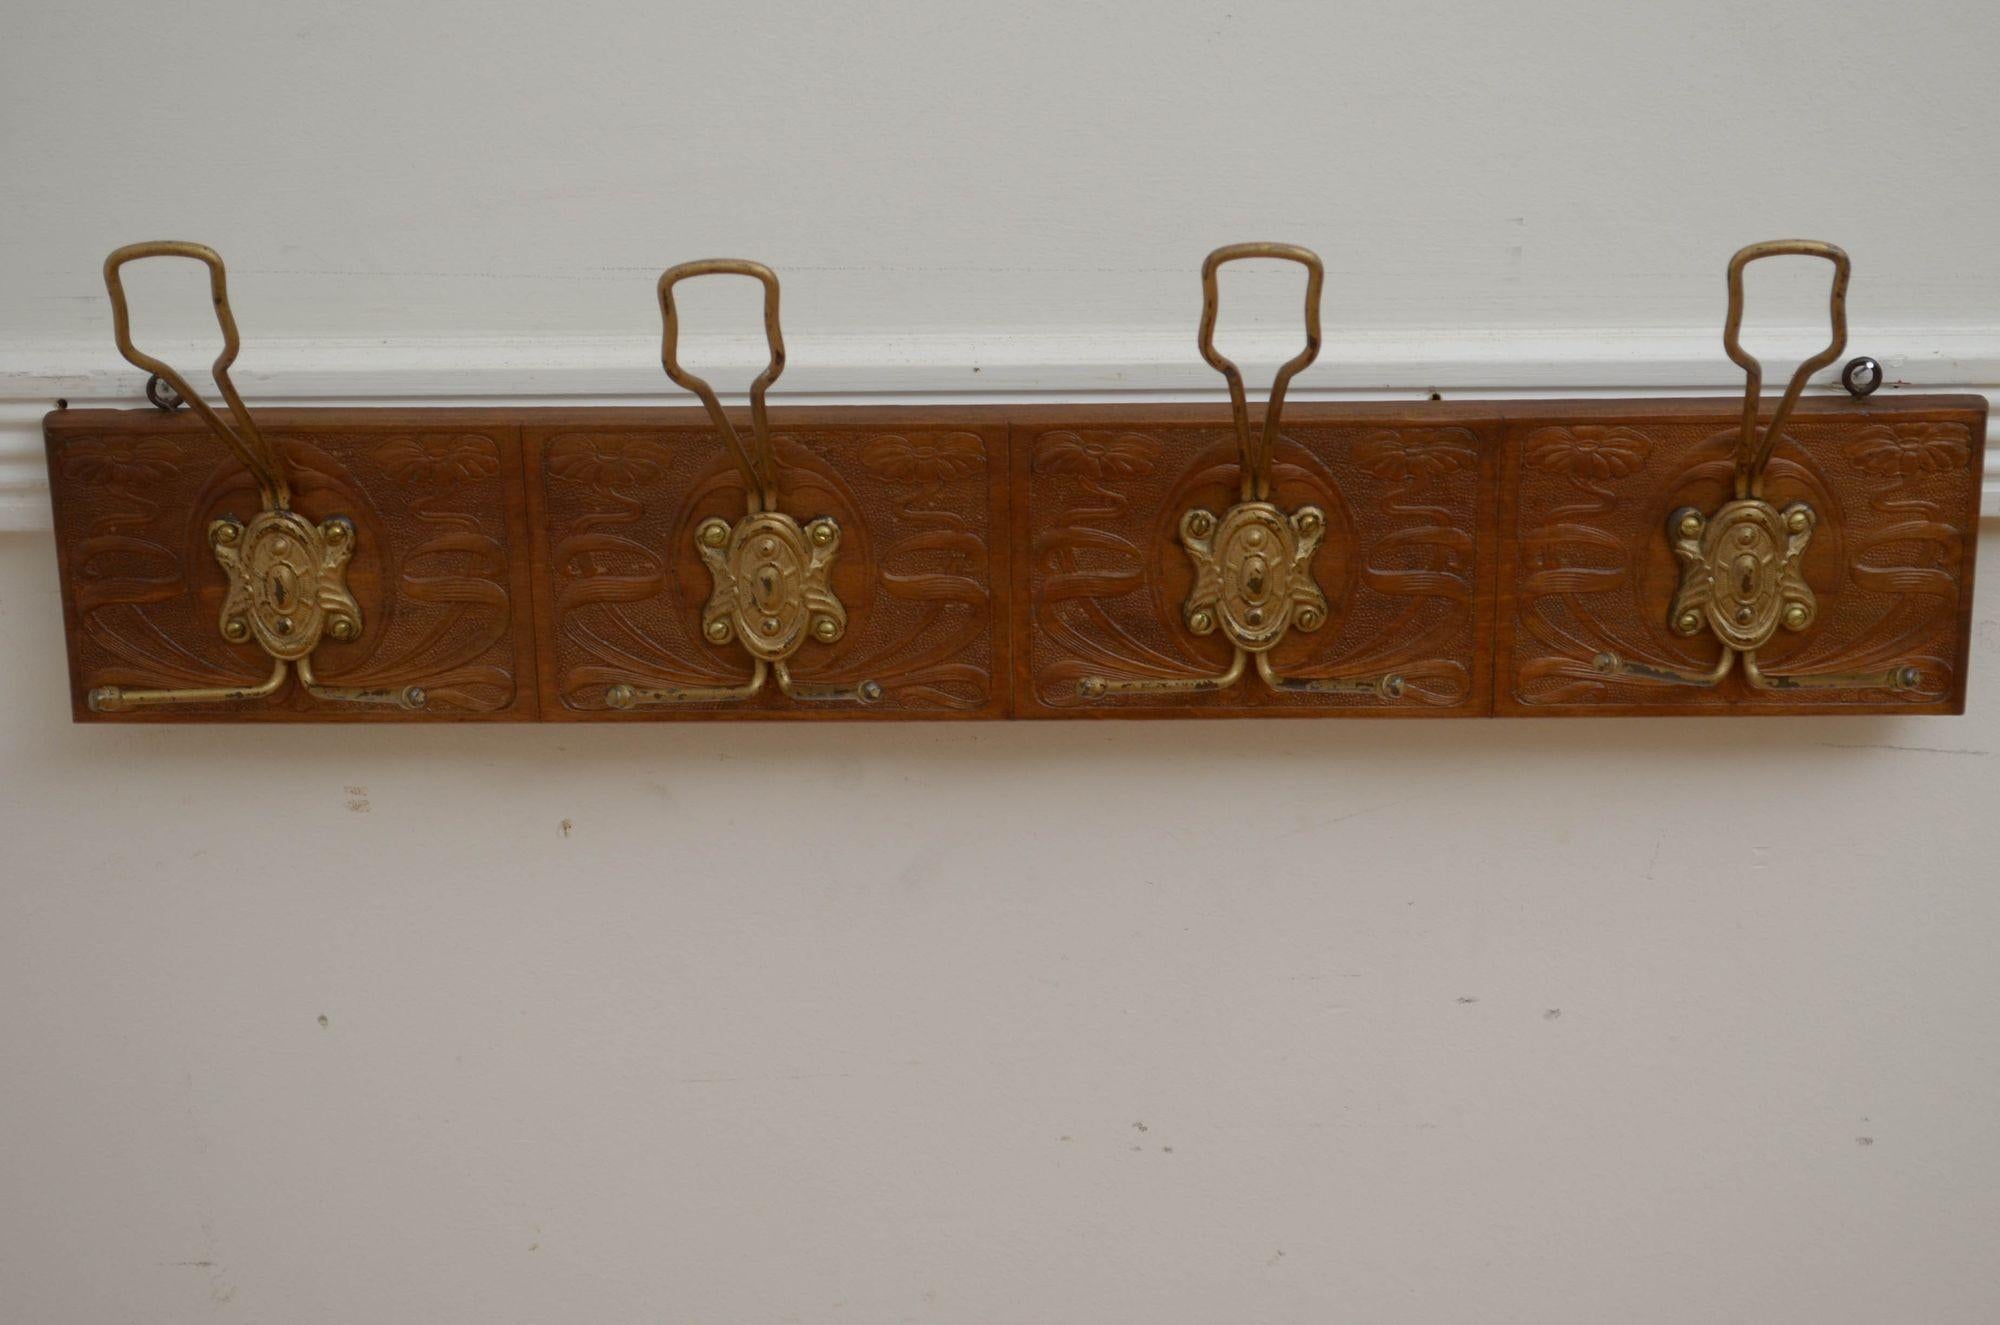 P0283 Very attractive Art Nouveau coat rack, having four triple hooks with decorative backplates on finely carved with floral motifs walnut backing, all in home ready condition. c1900
H8